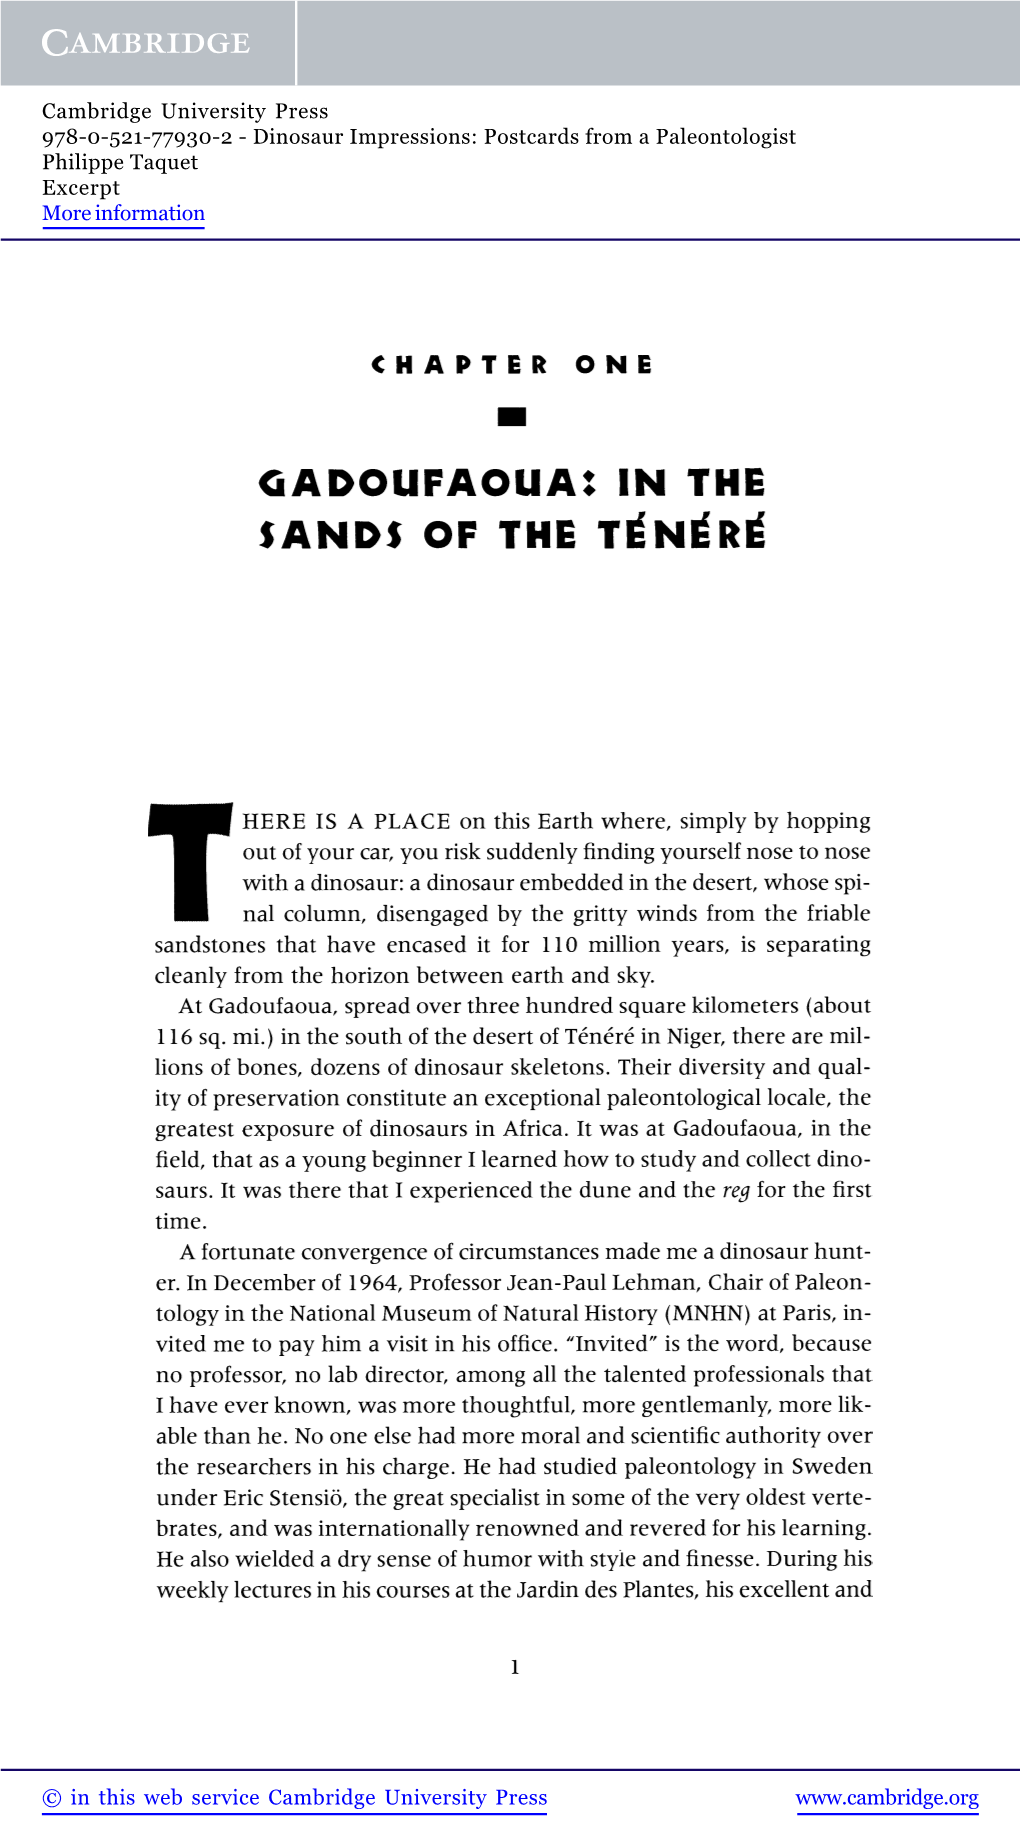 Gadoufaoua: in the Sands of the Tenere